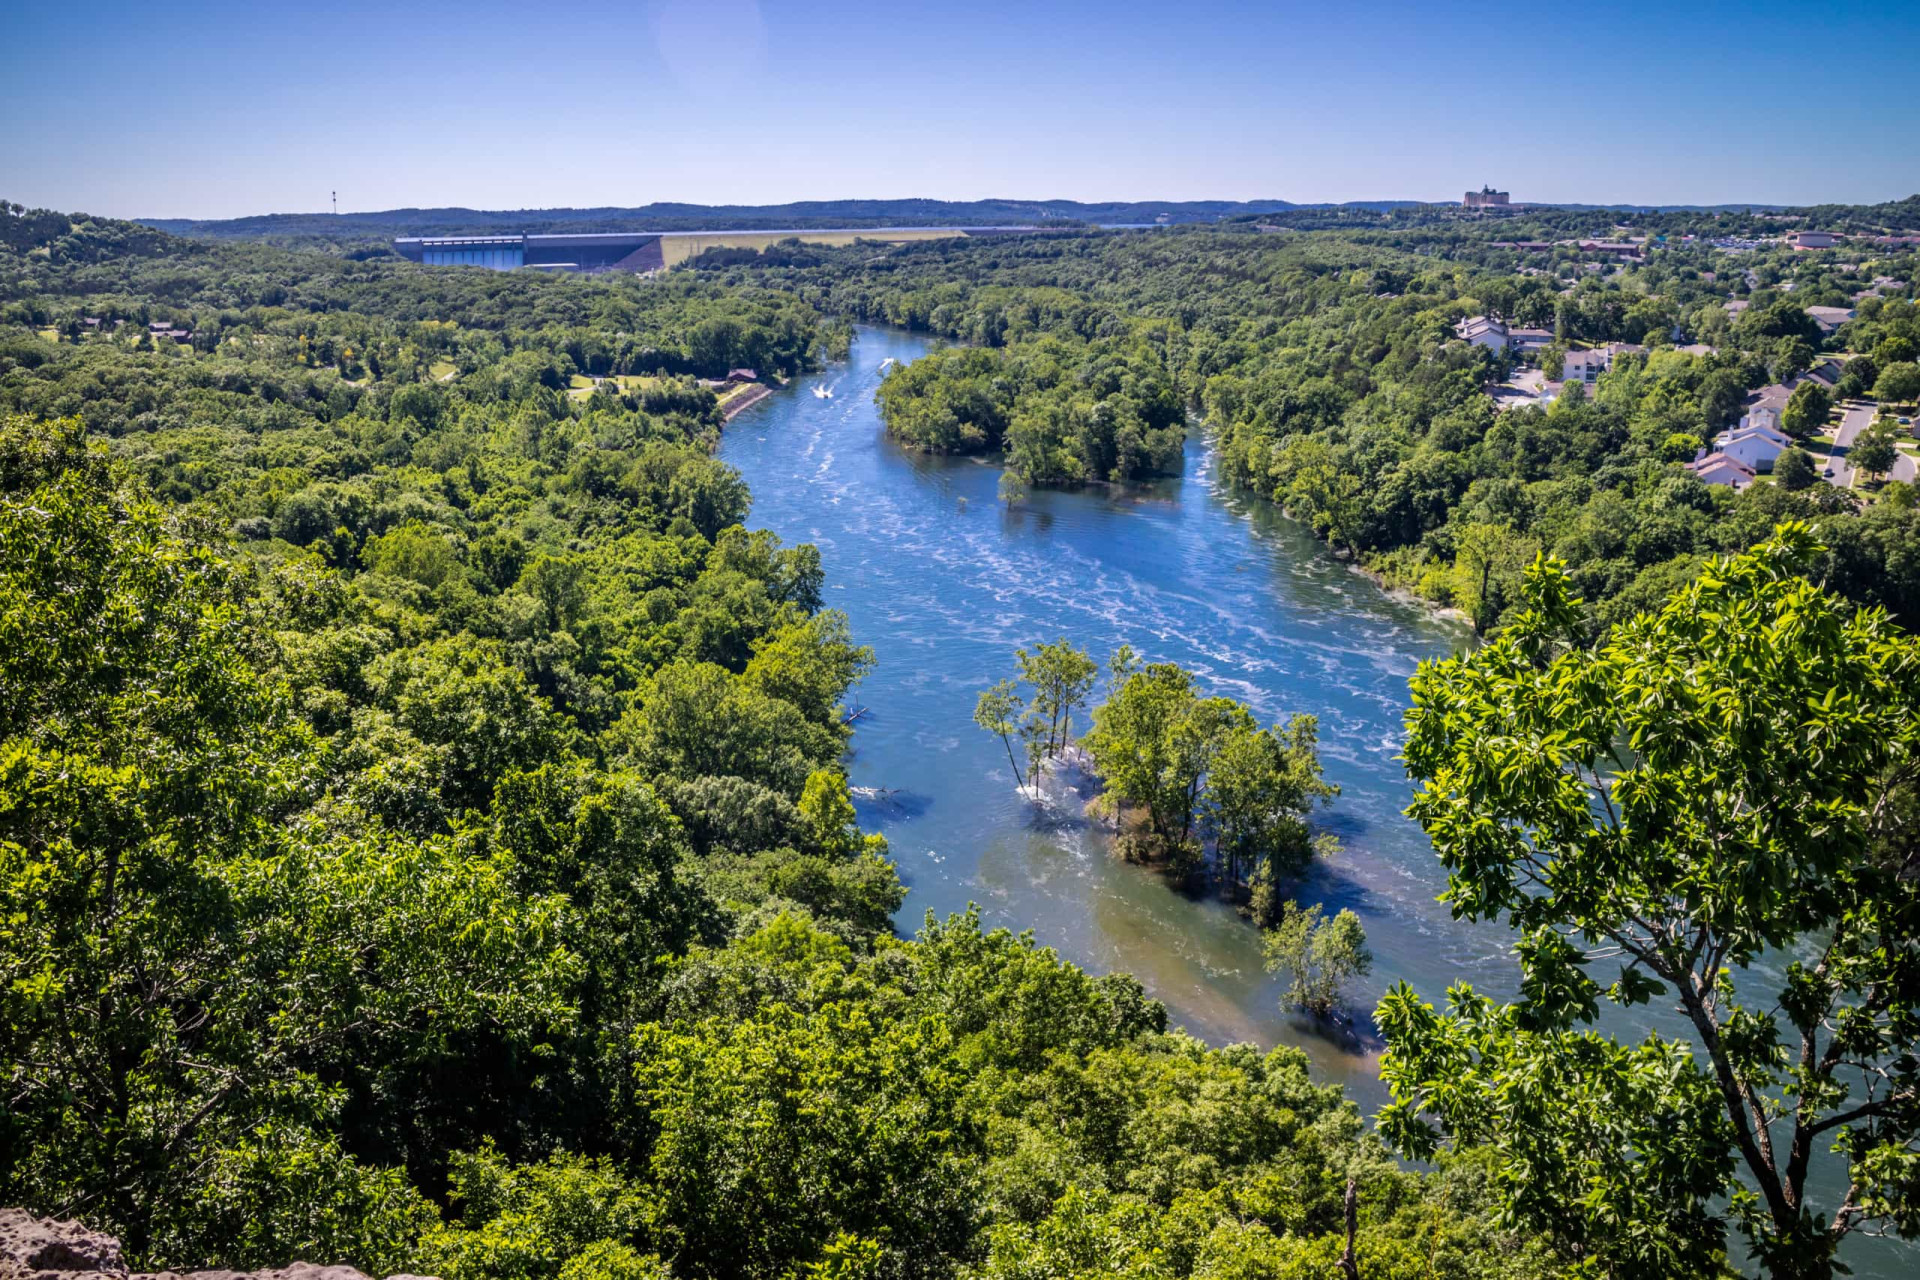 <p>One of the most beautiful spots in the Ozark countryside, Table Rock Lake has an incredible 800 miles (1287 km) of shoreline. A popular vacation destination, the lake is surrounded by waterfront cabins, restaurants, and opportunities for family-friendly activities such as kayaking and fishing.</p><p><a href="https://www.msn.com/en-us/community/channel/vid-7xx8mnucu55yw63we9va2gwr7uihbxwc68fxqp25x6tg4ftibpra?cvid=94631541bc0f4f89bfd59158d696ad7e">Follow us and access great exclusive content every day</a></p>